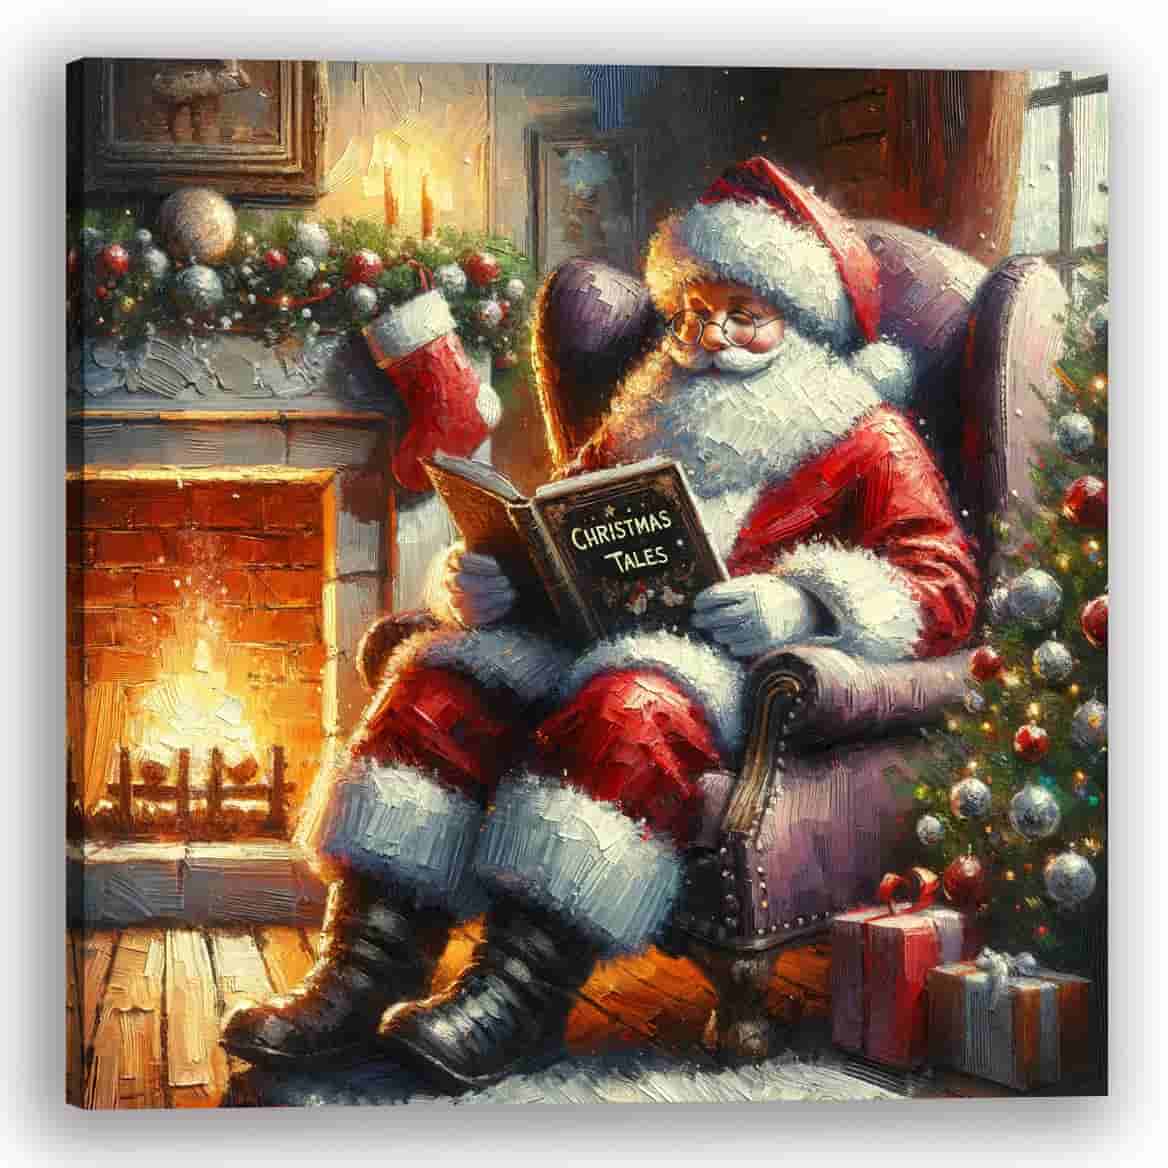 Yuletide Stories by the Hearth - Wrapped Canvas wall Art Prints